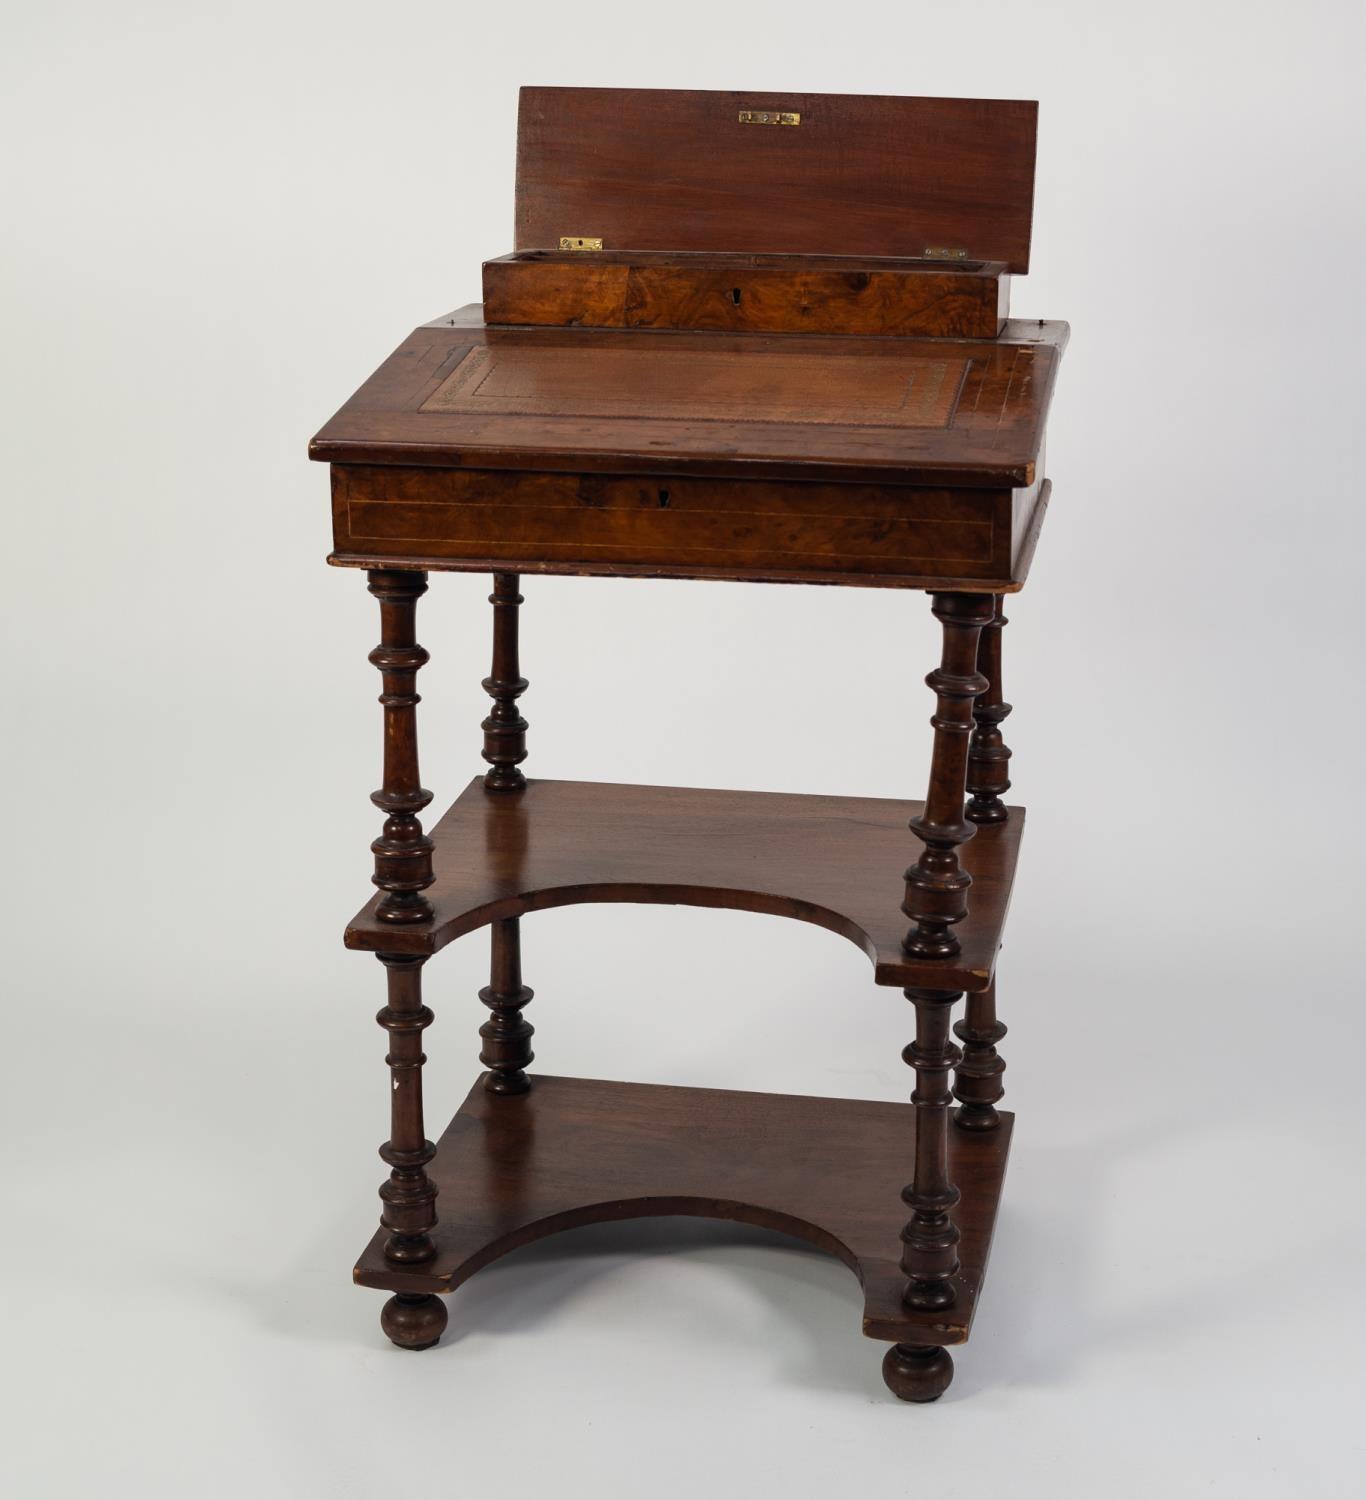 VICTORIAN LINE INLAID AND FIGURED WALNUT DAVENPORT STYLE DESK, the oblong stationery box with - Image 2 of 3